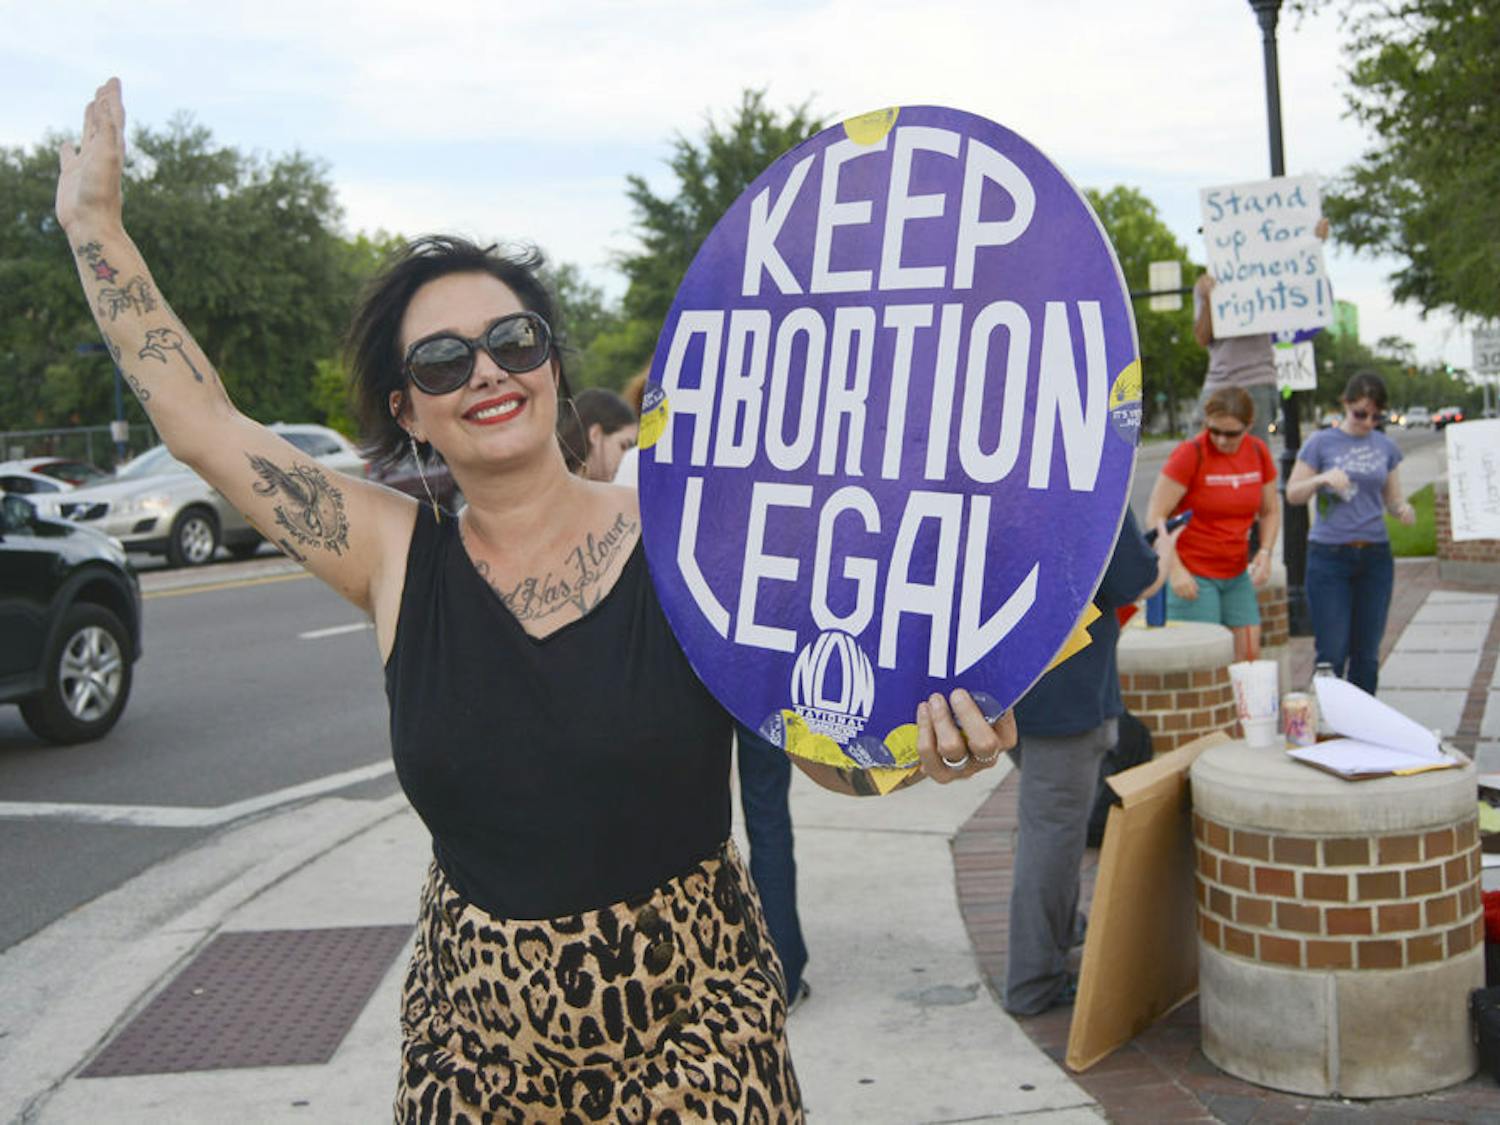 Su Mendez, an activist with the National Organization for Women and National Women’s Liberation, holds a sign and waves at passing vehicles at an abortion rights protest on University Avenue and 13th Street on Tuesday.